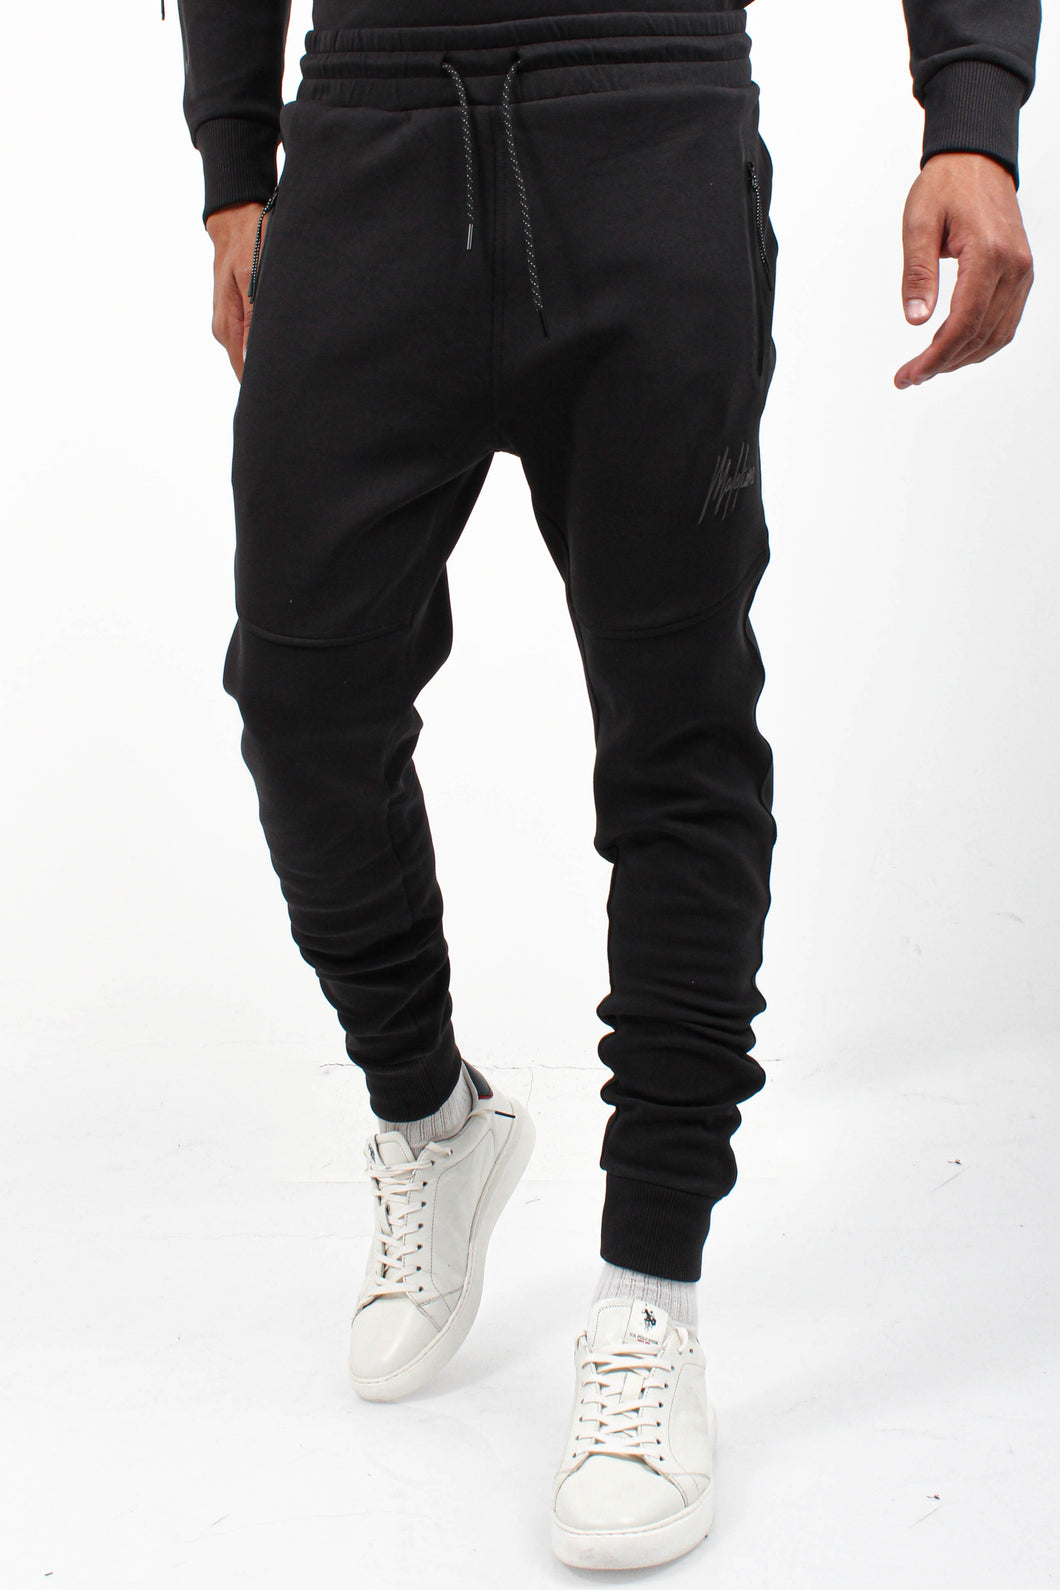 SPORT COUNTER TRACKPANTS